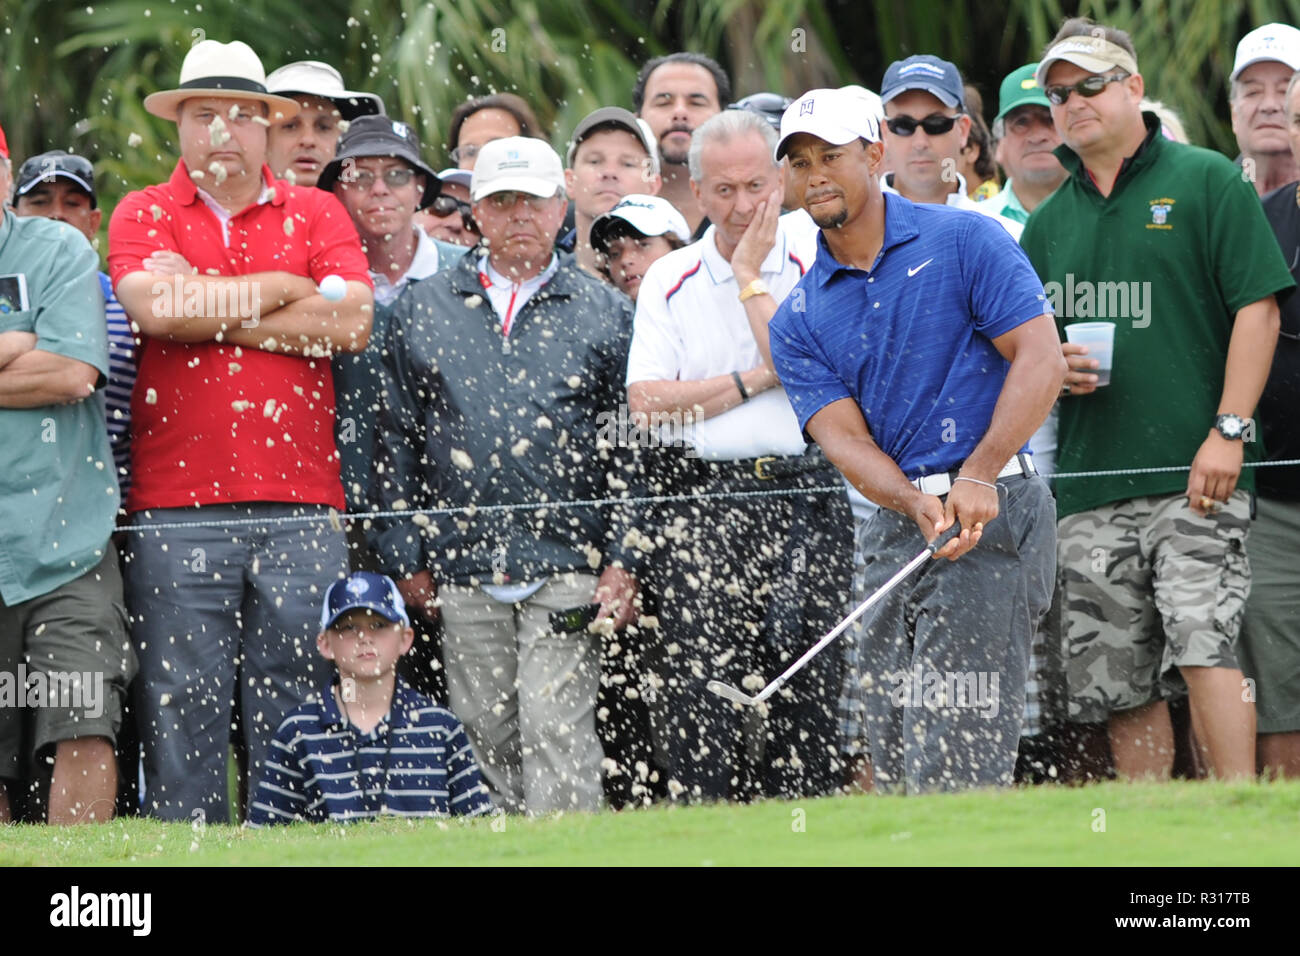 DORAL, FL - MARCH 10: Tiger Woods and Phil Mickelson during the first round of the 2011 WGC- Cadillac Championship at the TPC Blue Monster at the Doral Golf Resort and Spa. A severe storm ripped through the course causing all kinds of damage including the scoreboard falling down.  on March 10, 2011 in Doral, Florida.   People:  Tiger Woods Stock Photo